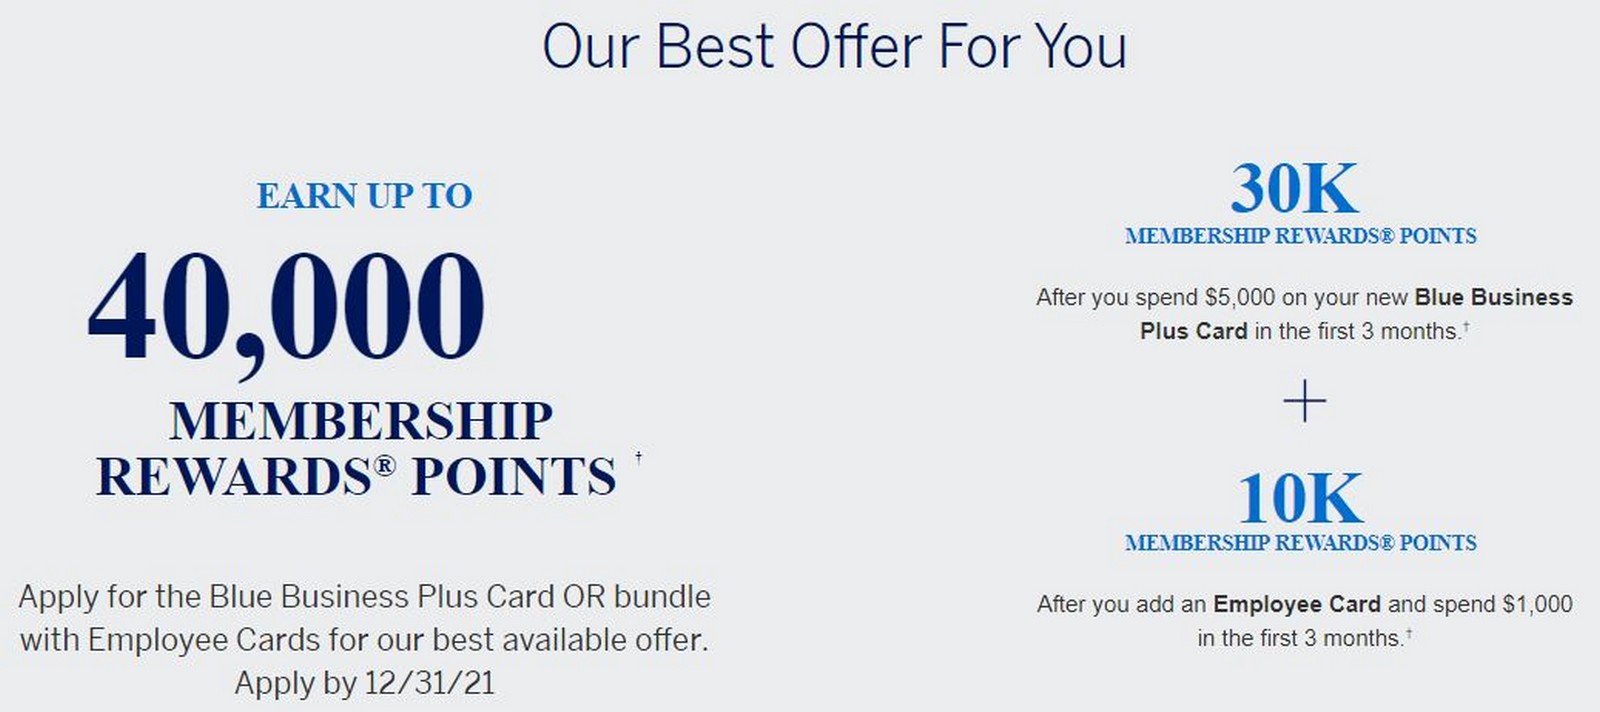 Best Ever Offer For The Blue Business Plus